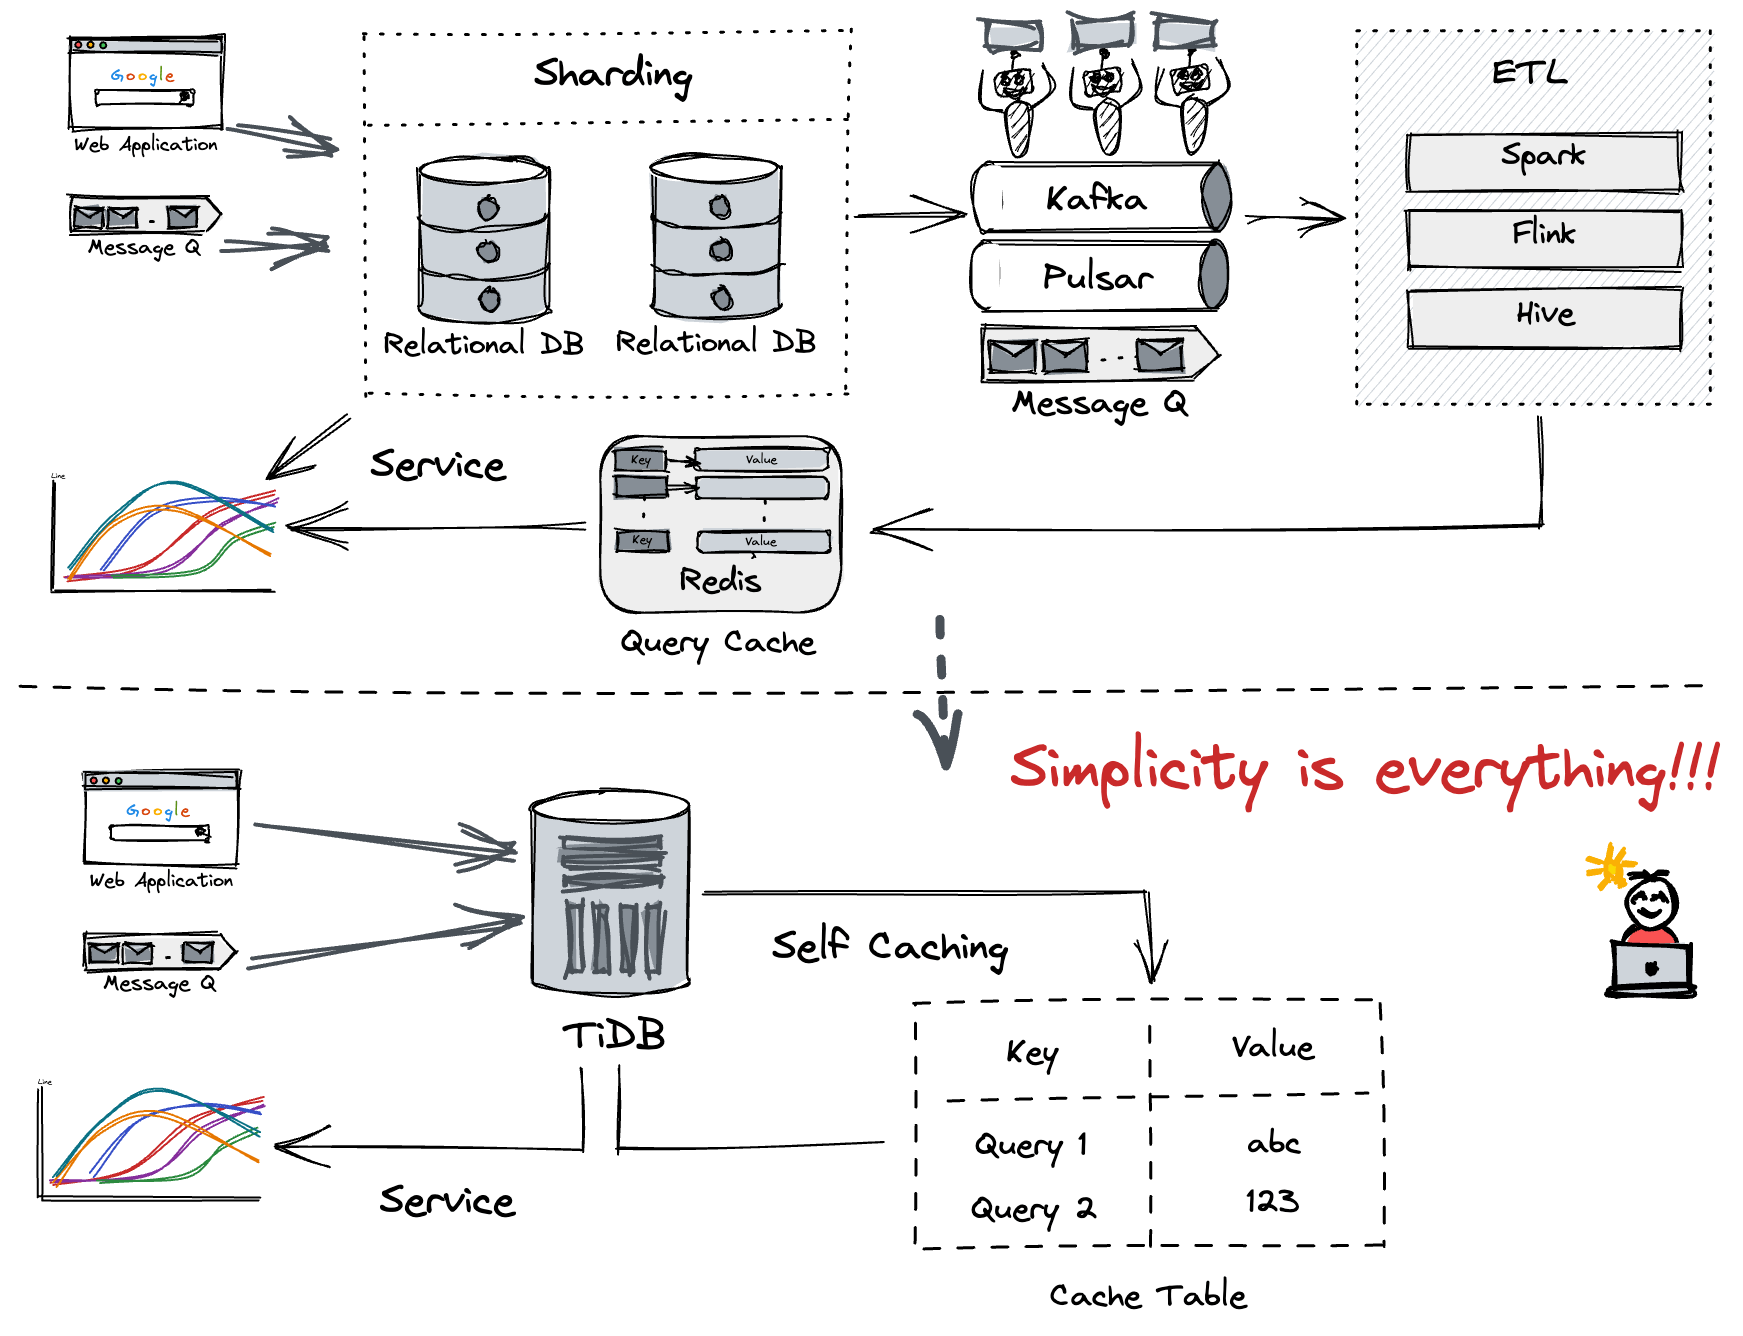 Simplified architecture after we use TiDB